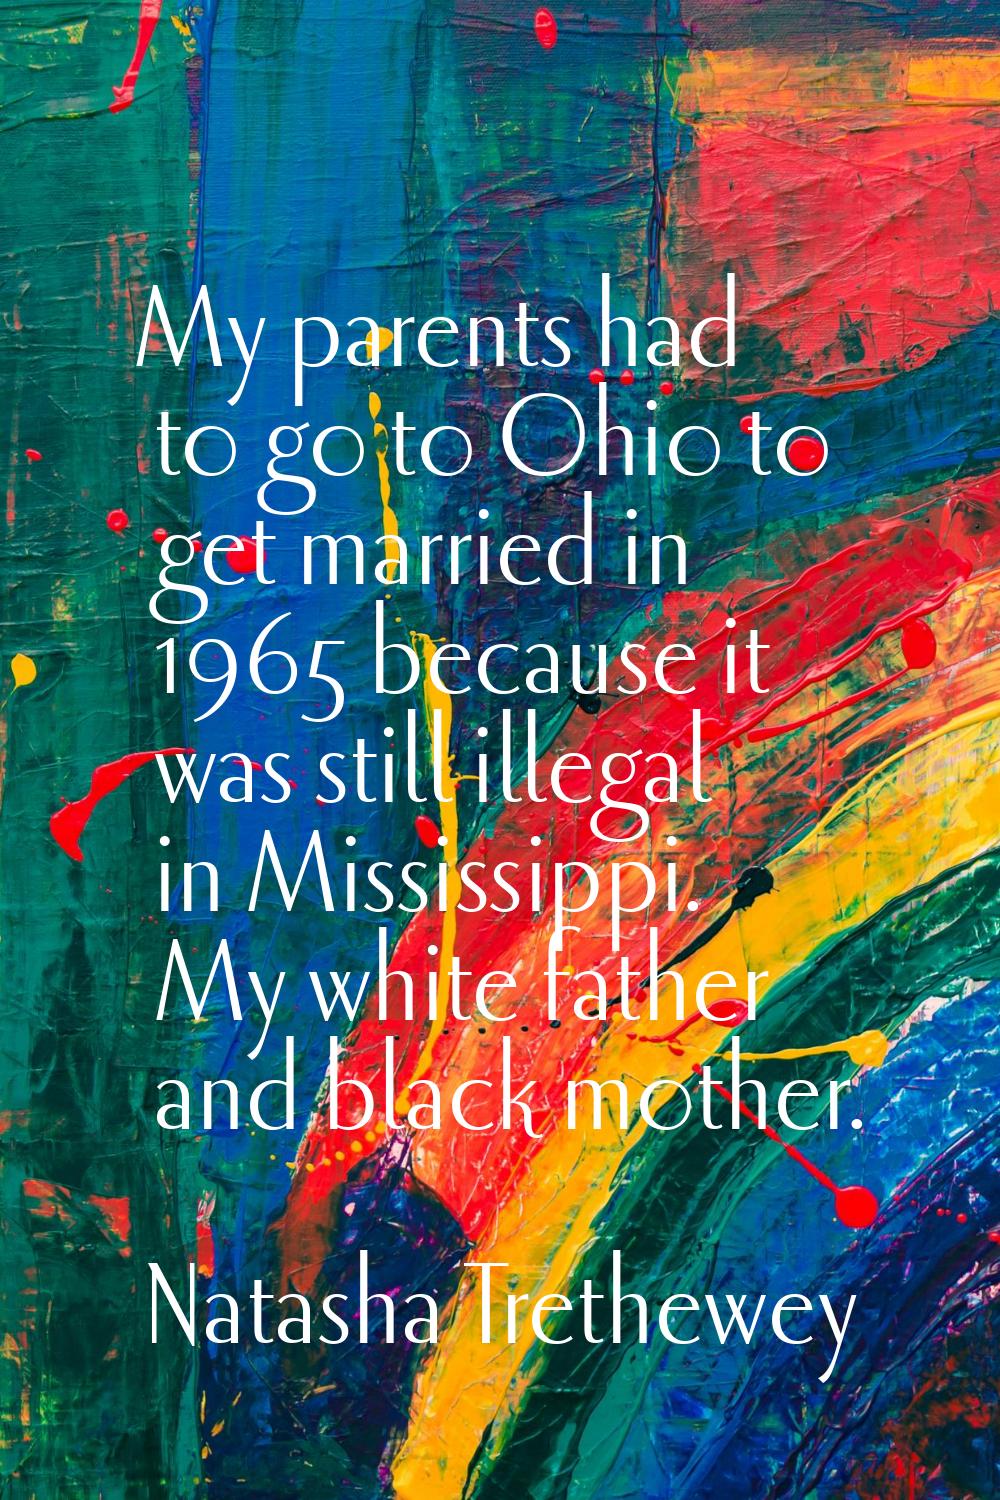 My parents had to go to Ohio to get married in 1965 because it was still illegal in Mississippi. My